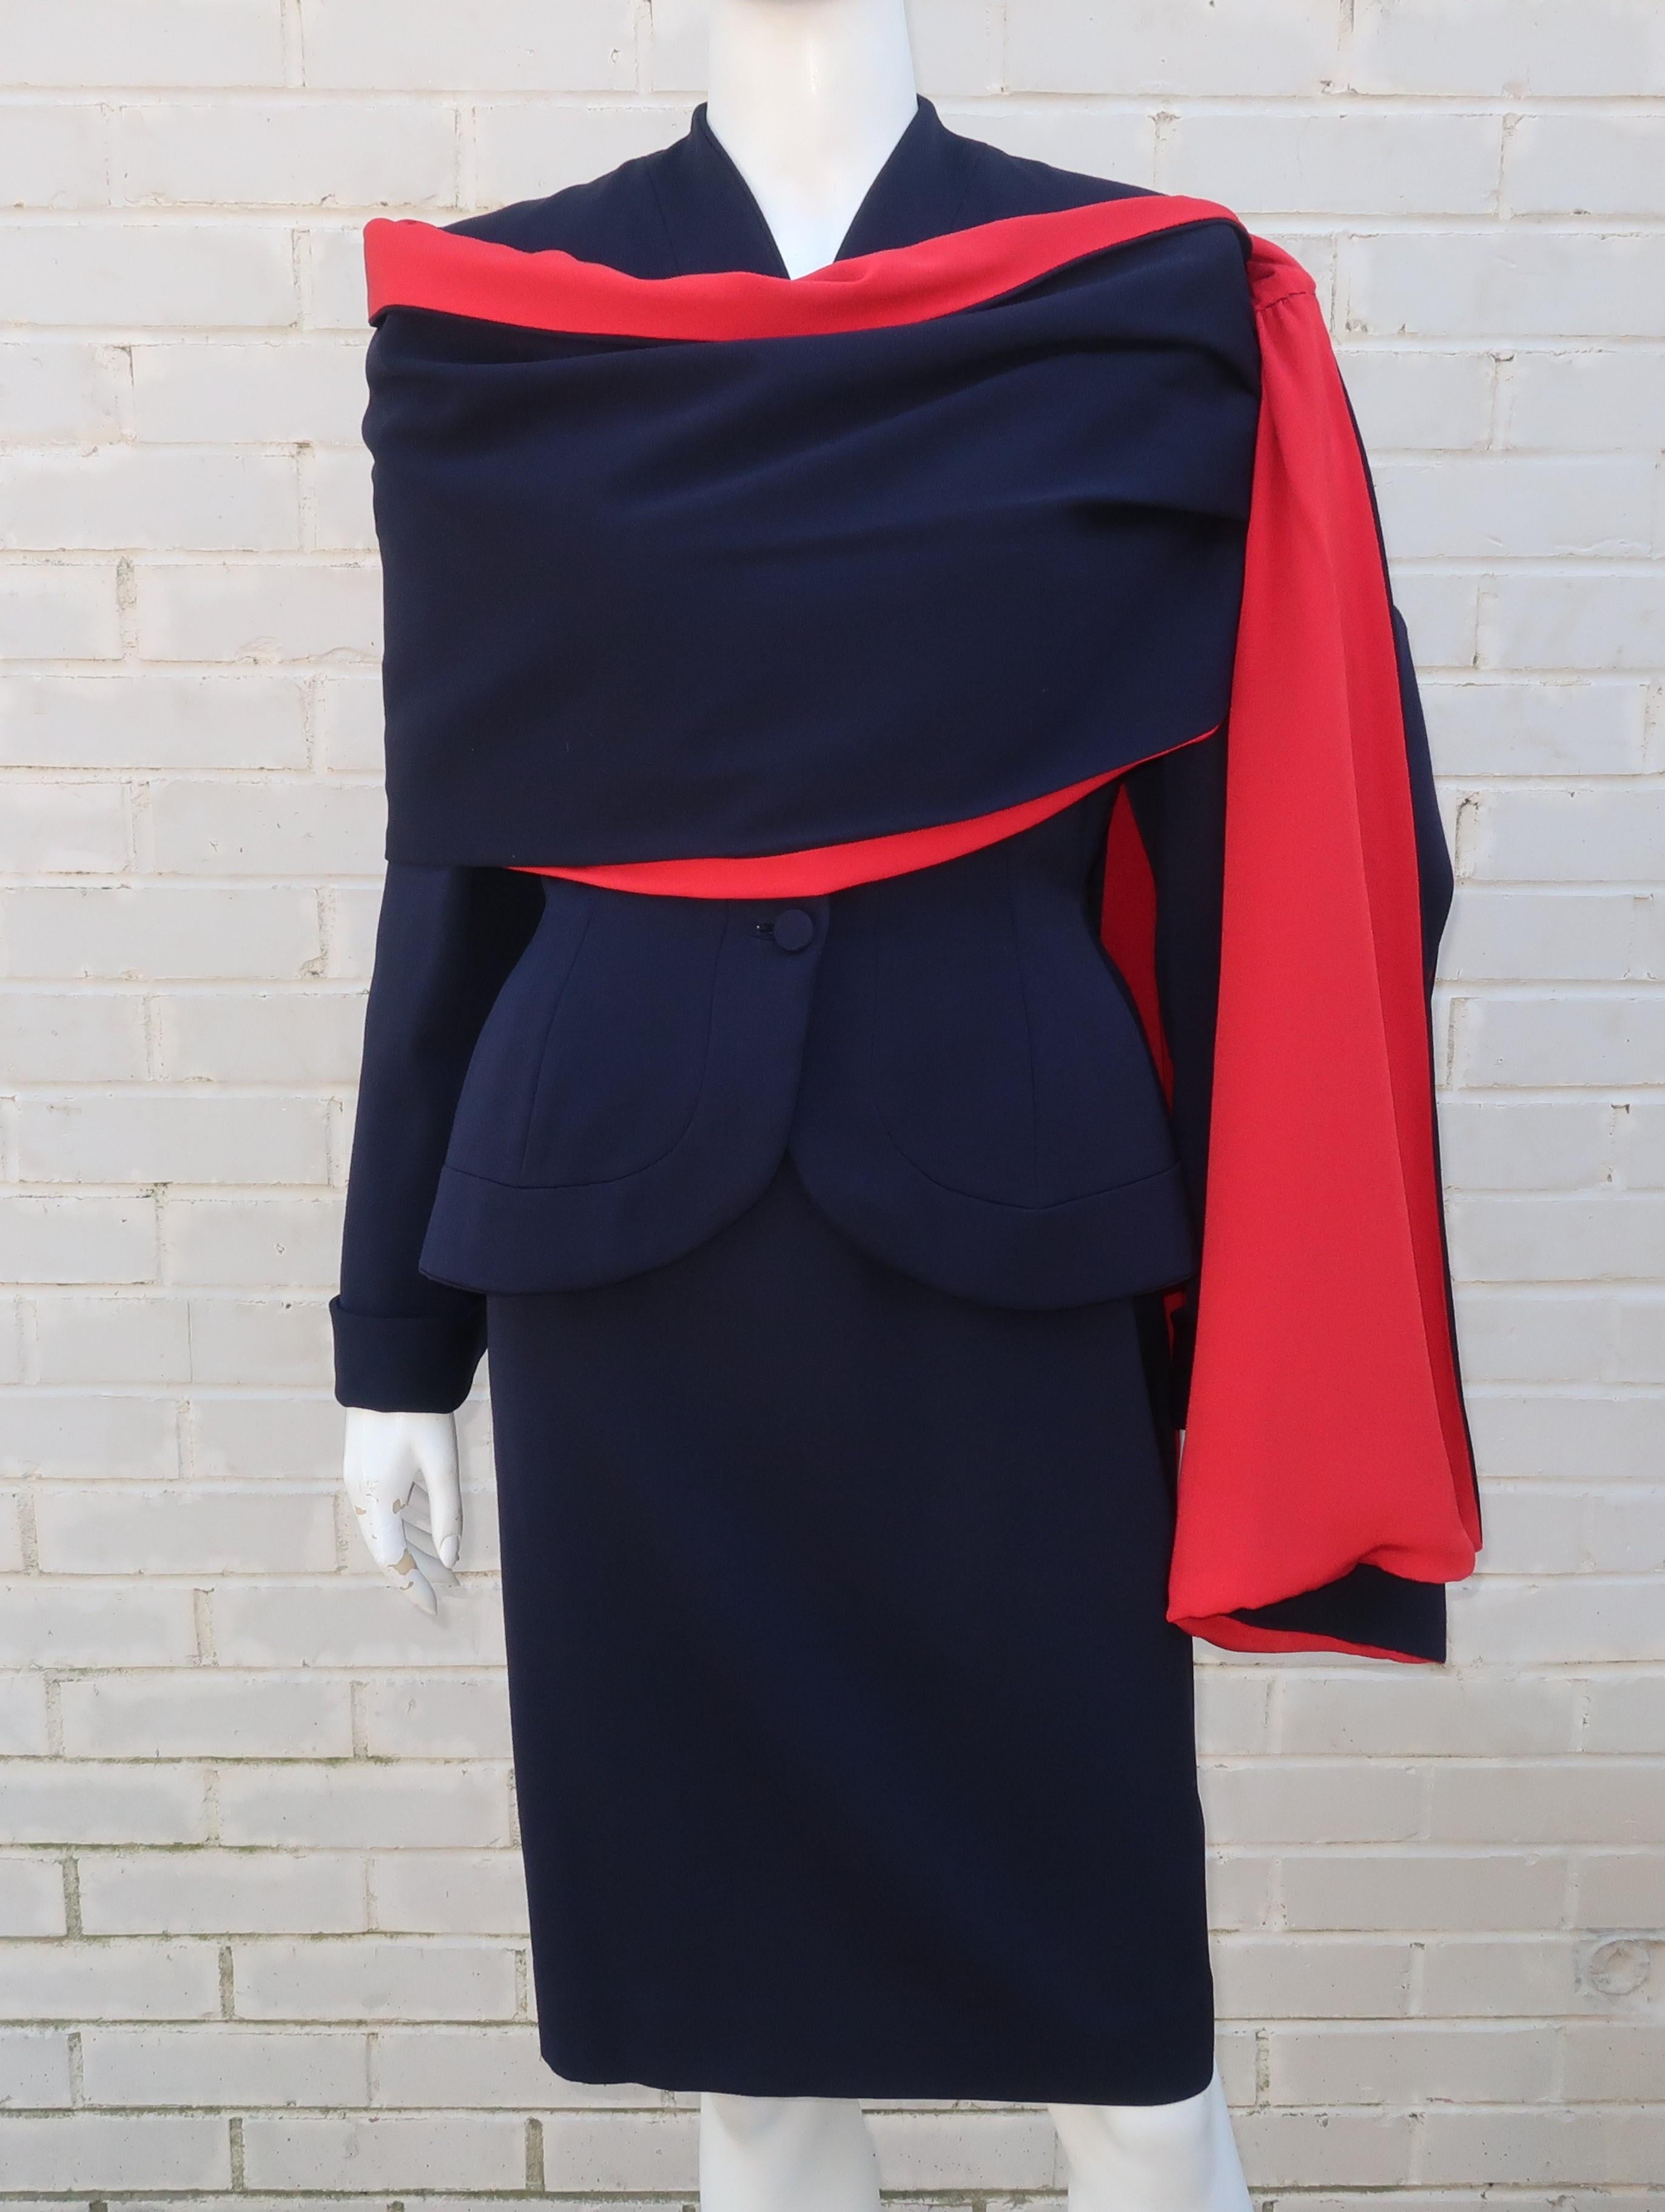 Black Dan Millstein Adaptation of Balenciaga Blue and Red Suit With Drape, 1950s 